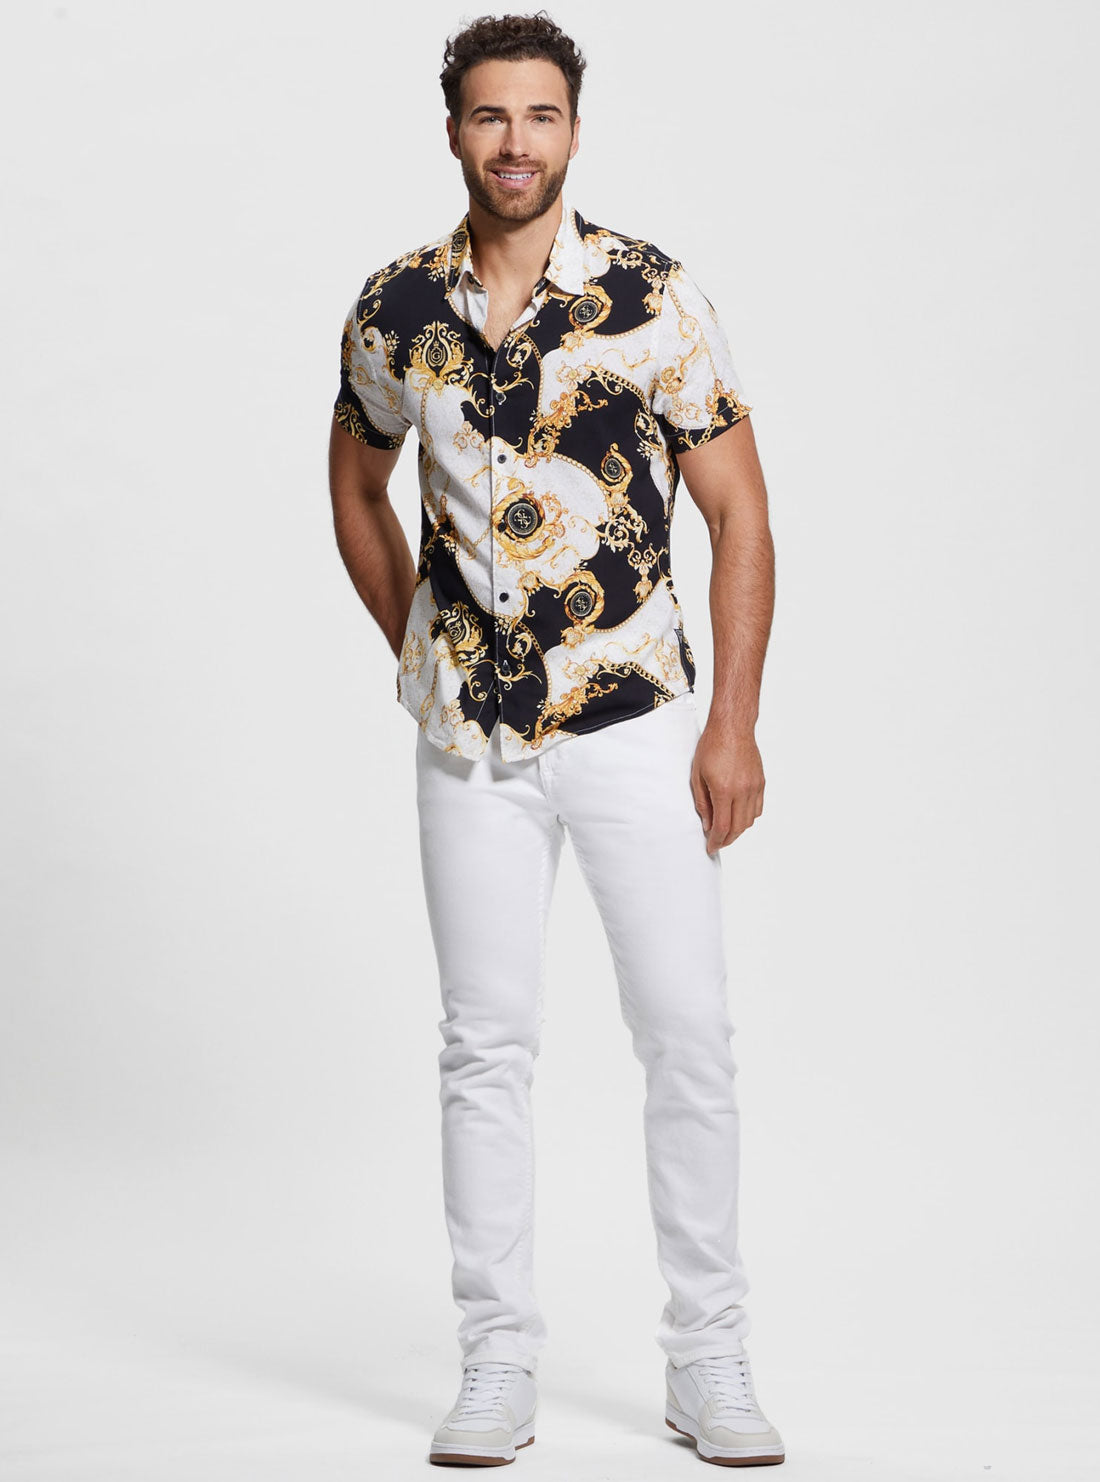 GUESS Eco Gold Chain Print Short Sleeve Shirt full view